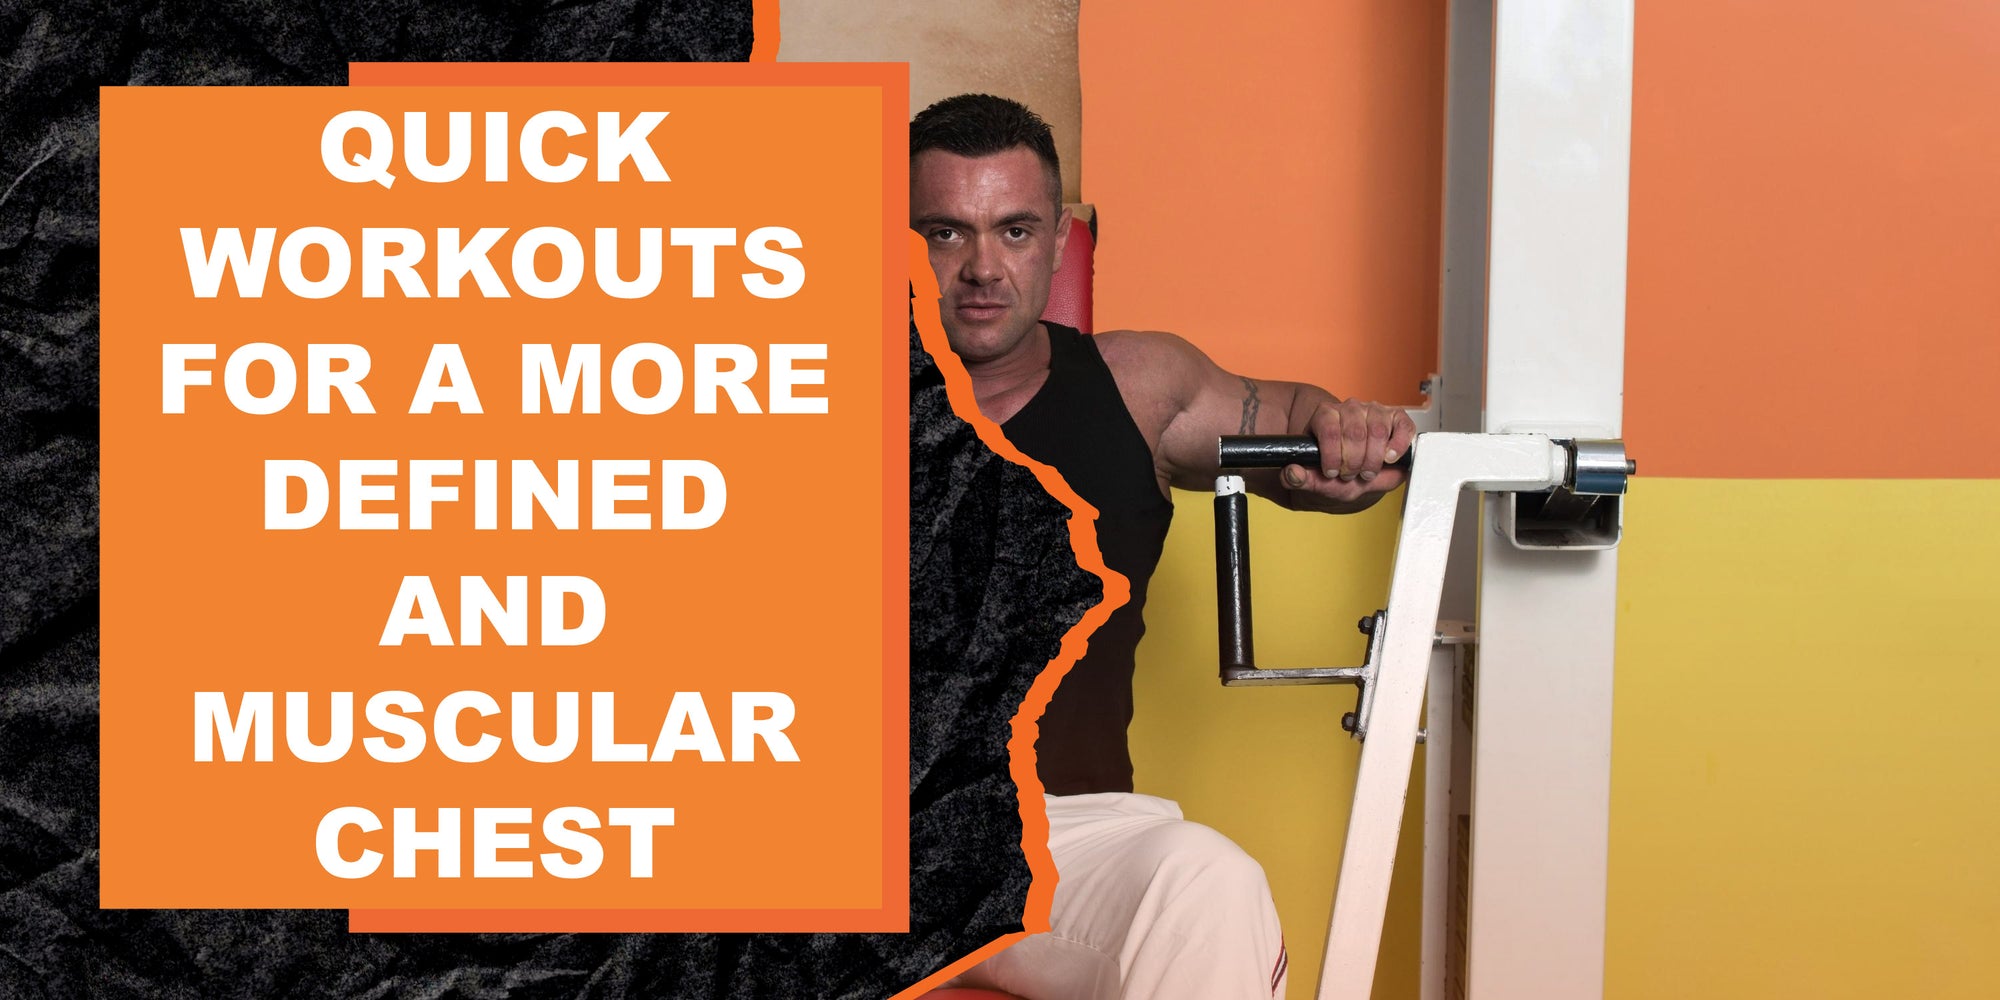 Quick Workouts for a More Defined and Muscular Chest